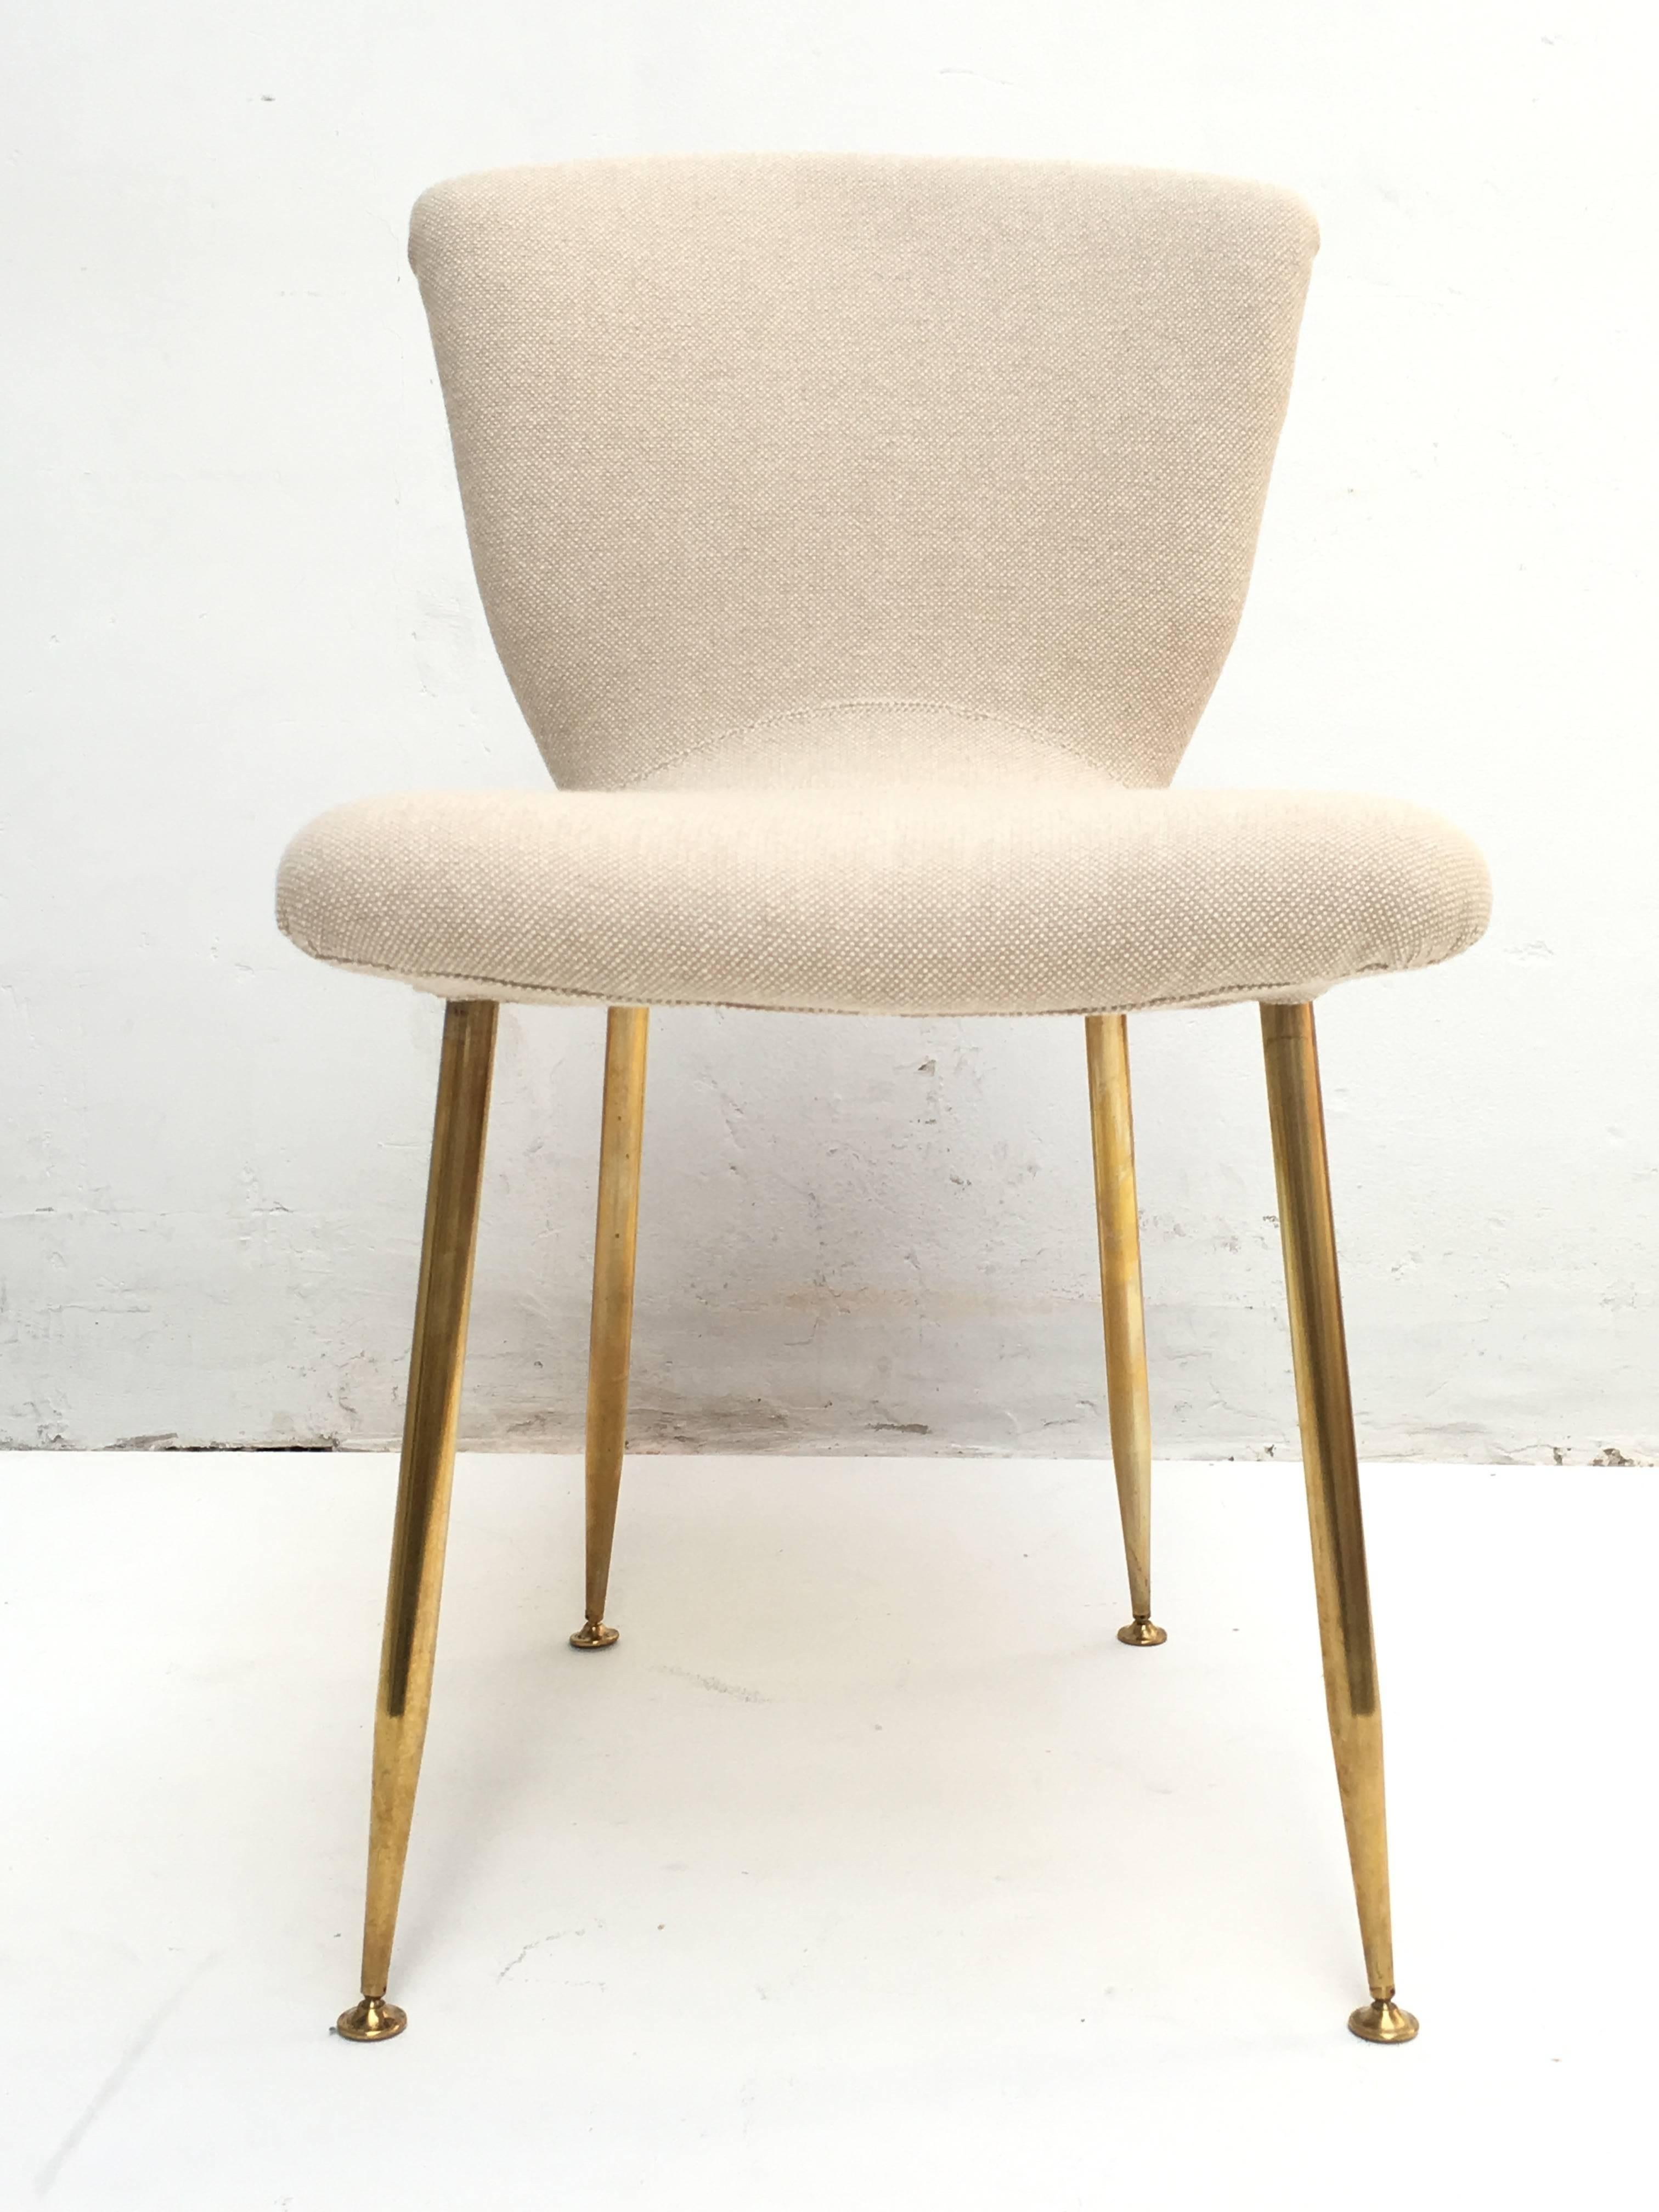 12 dining chairs by Louis Sognot for ARFLEX, 1959. Brass legs, Upholstery restored 2